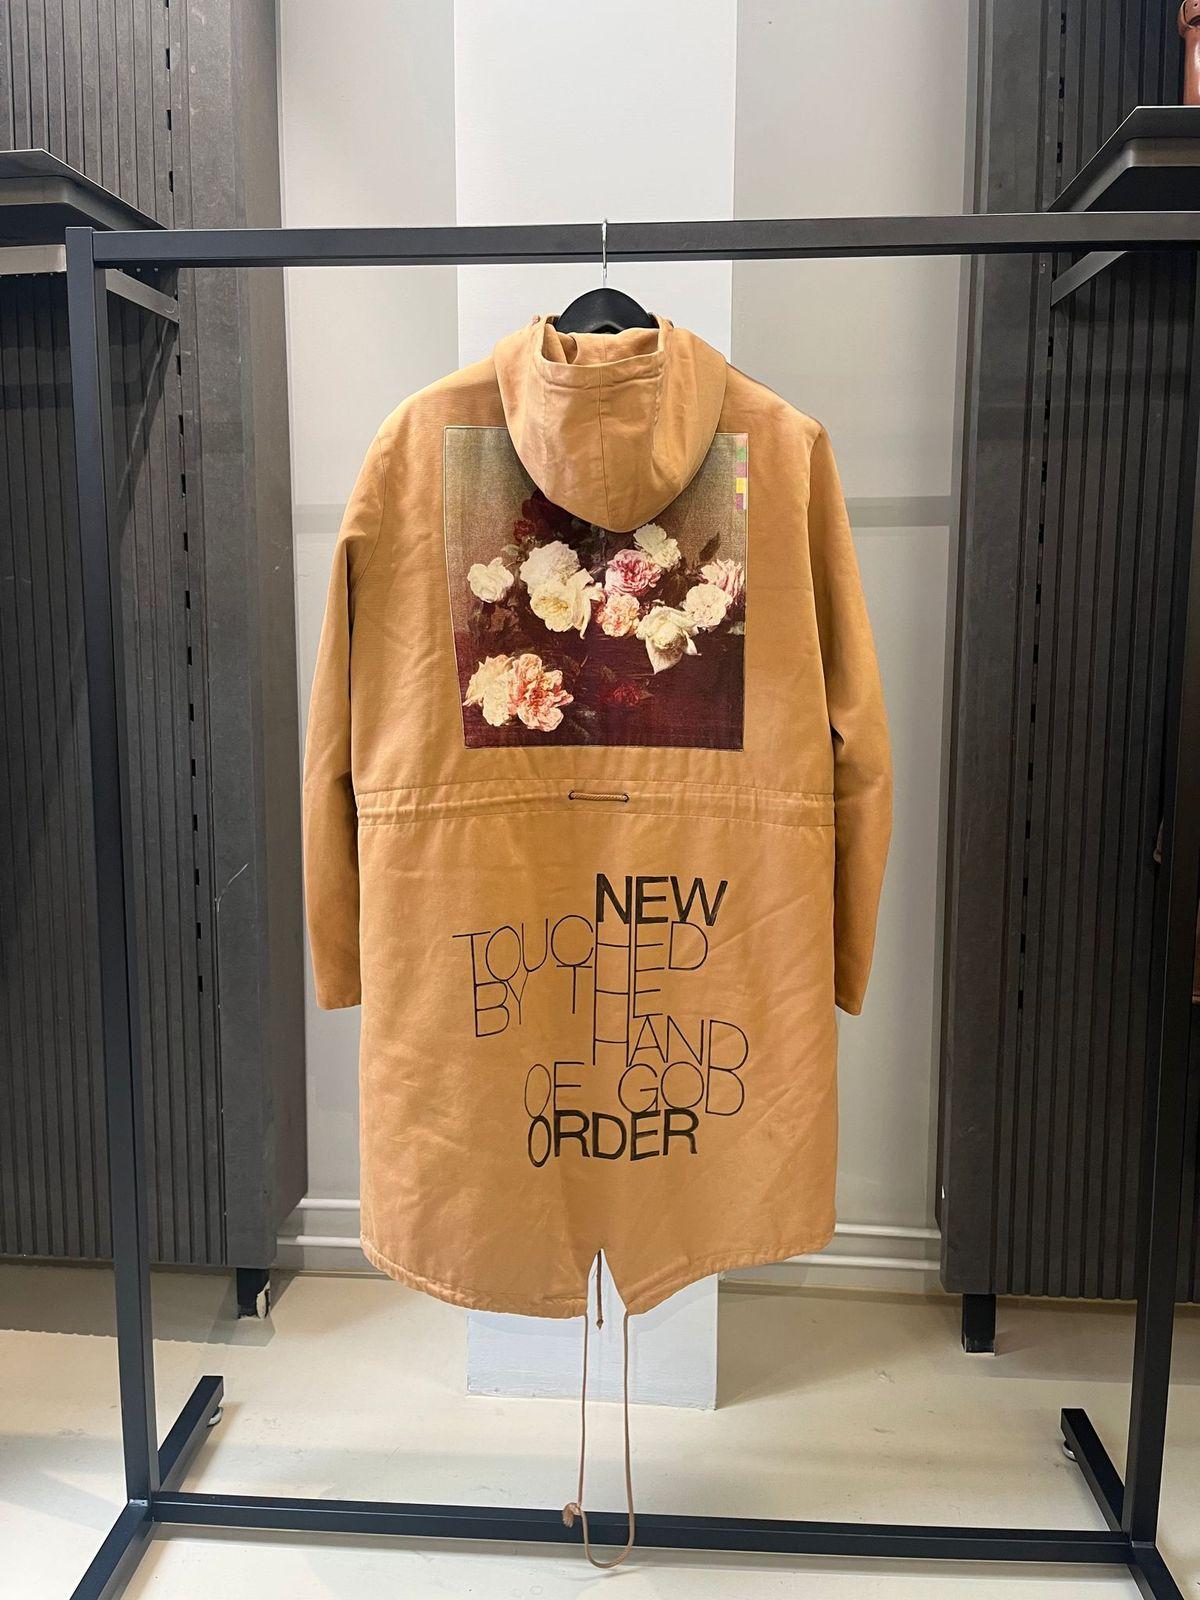 Raf Simons
AW03 Closer New Order Parka
Size 48

One of the most iconic pieces of Raf Simons. The AW03 Closer parka which has been hand-painted. In great condition, please refer to the pictures. Size 48, fits true to size.
